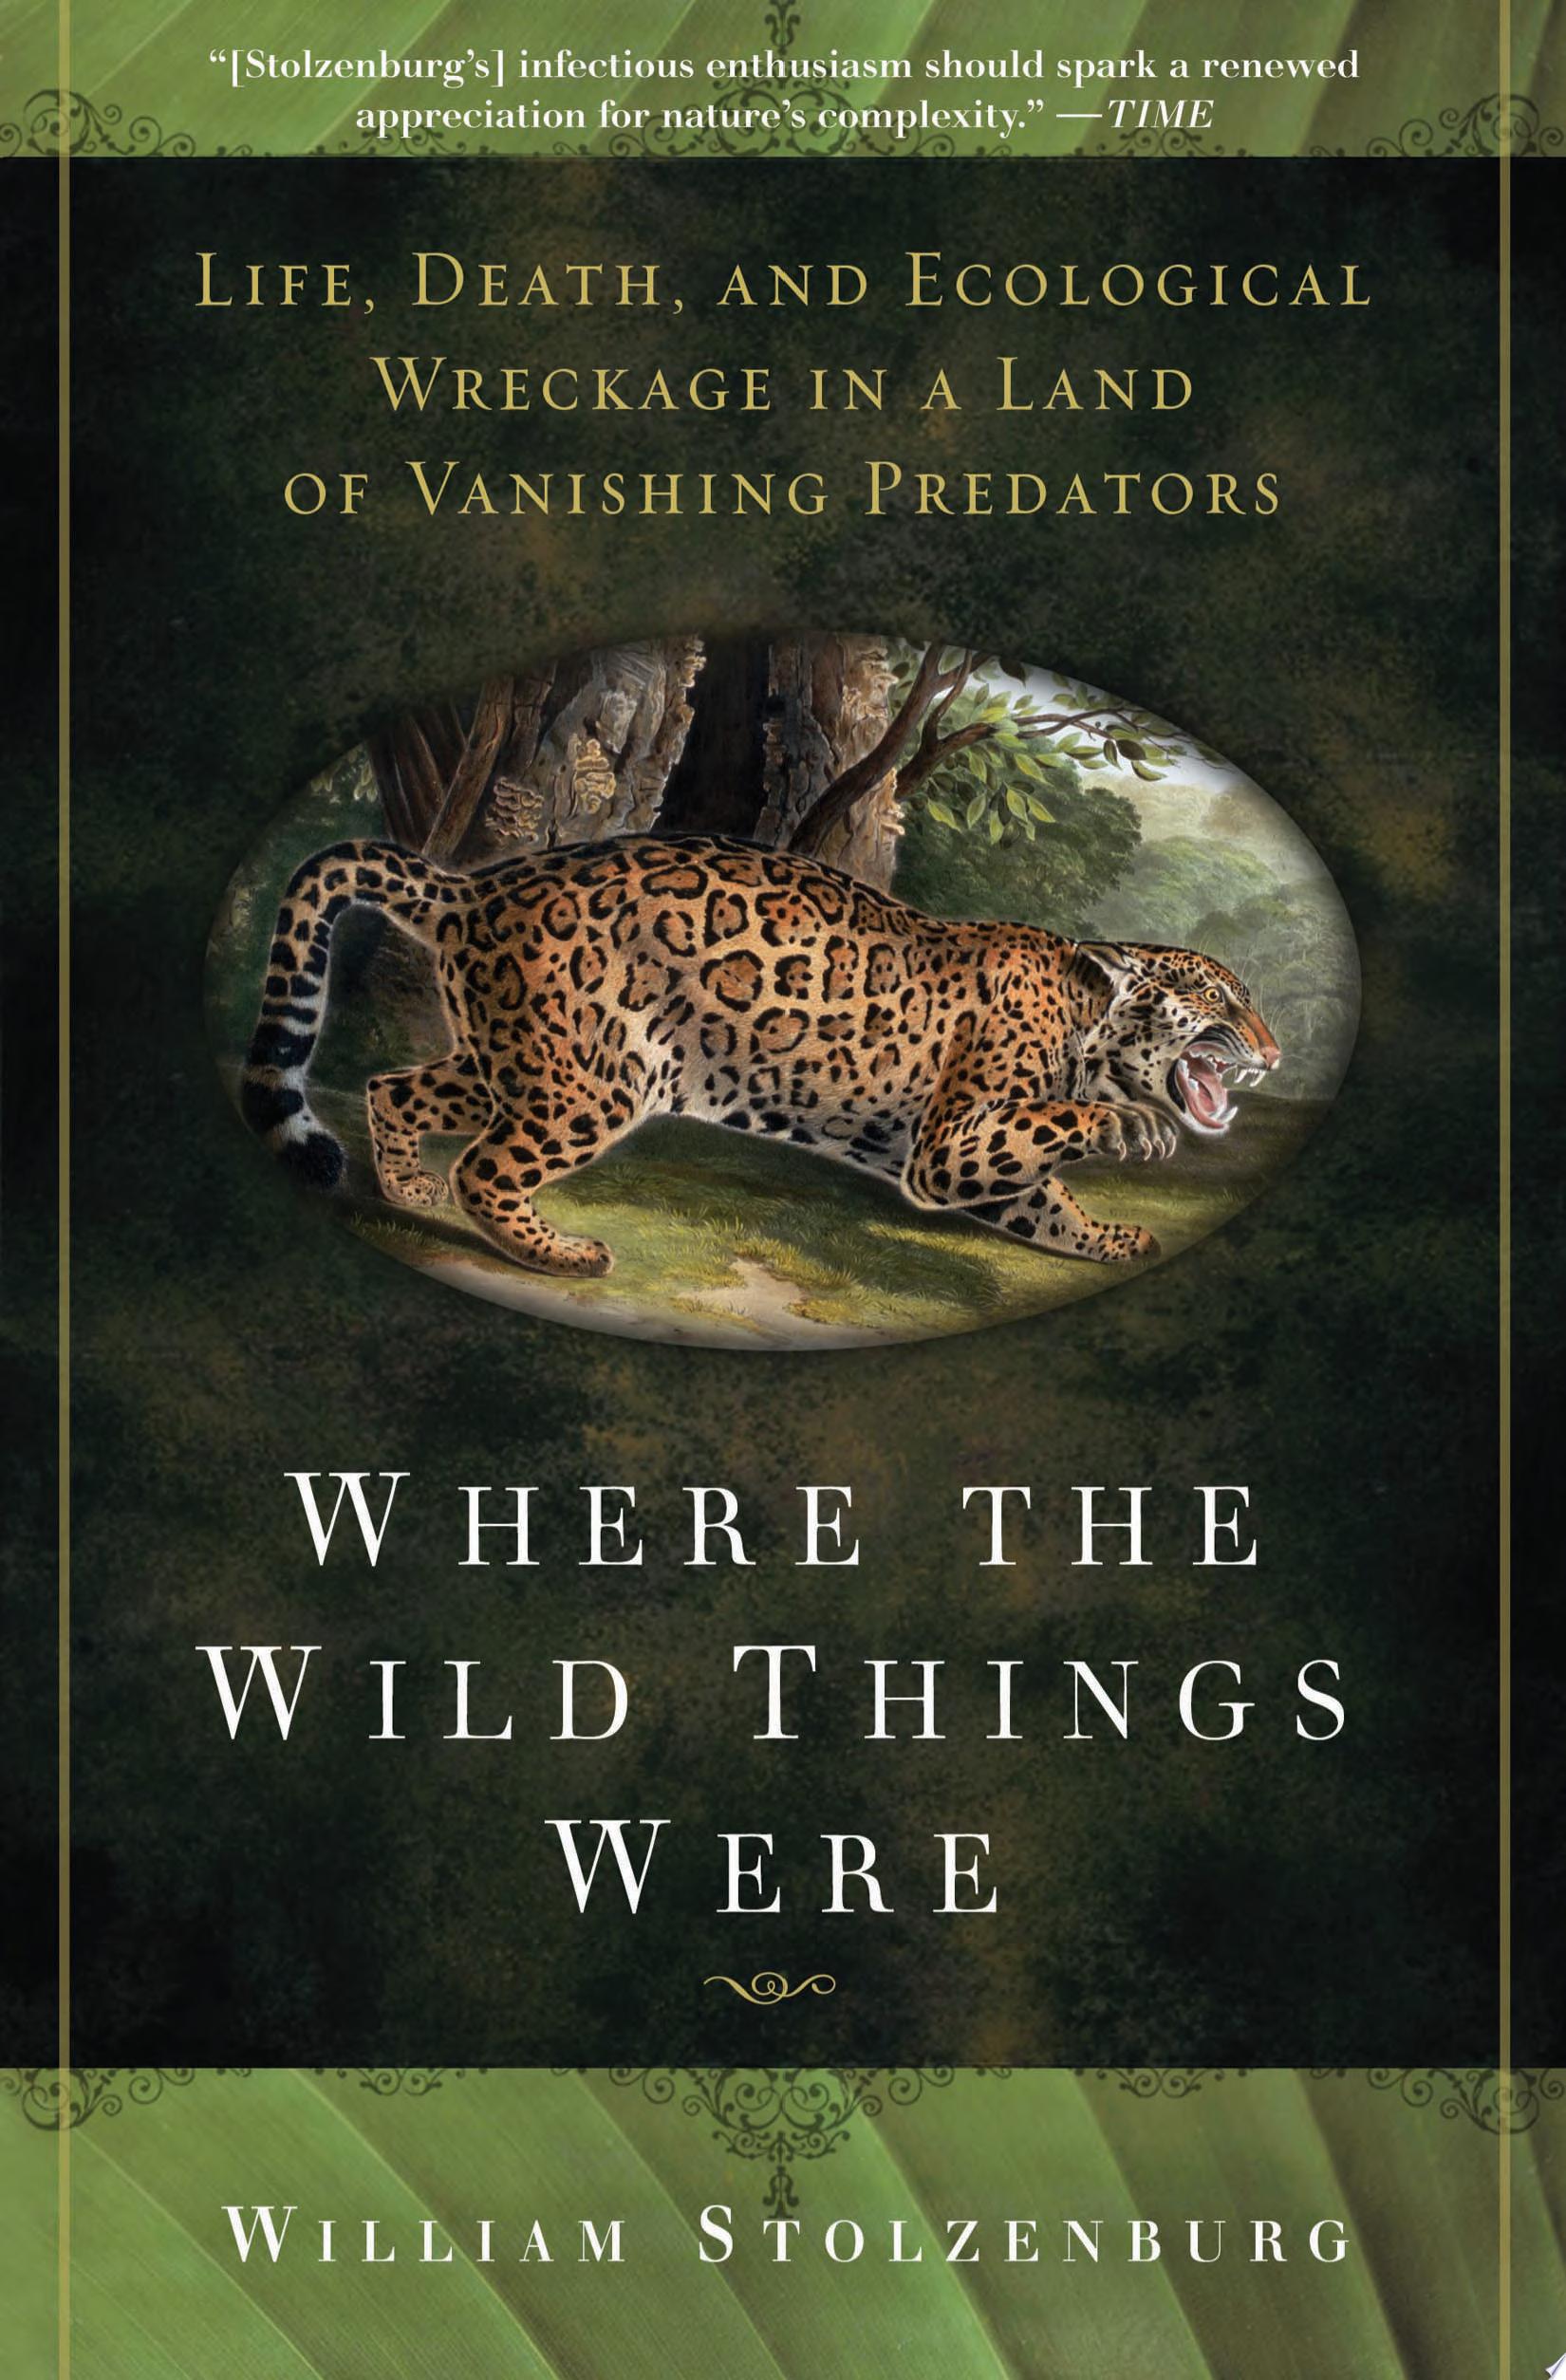 Image for "Where the Wild Things Were"